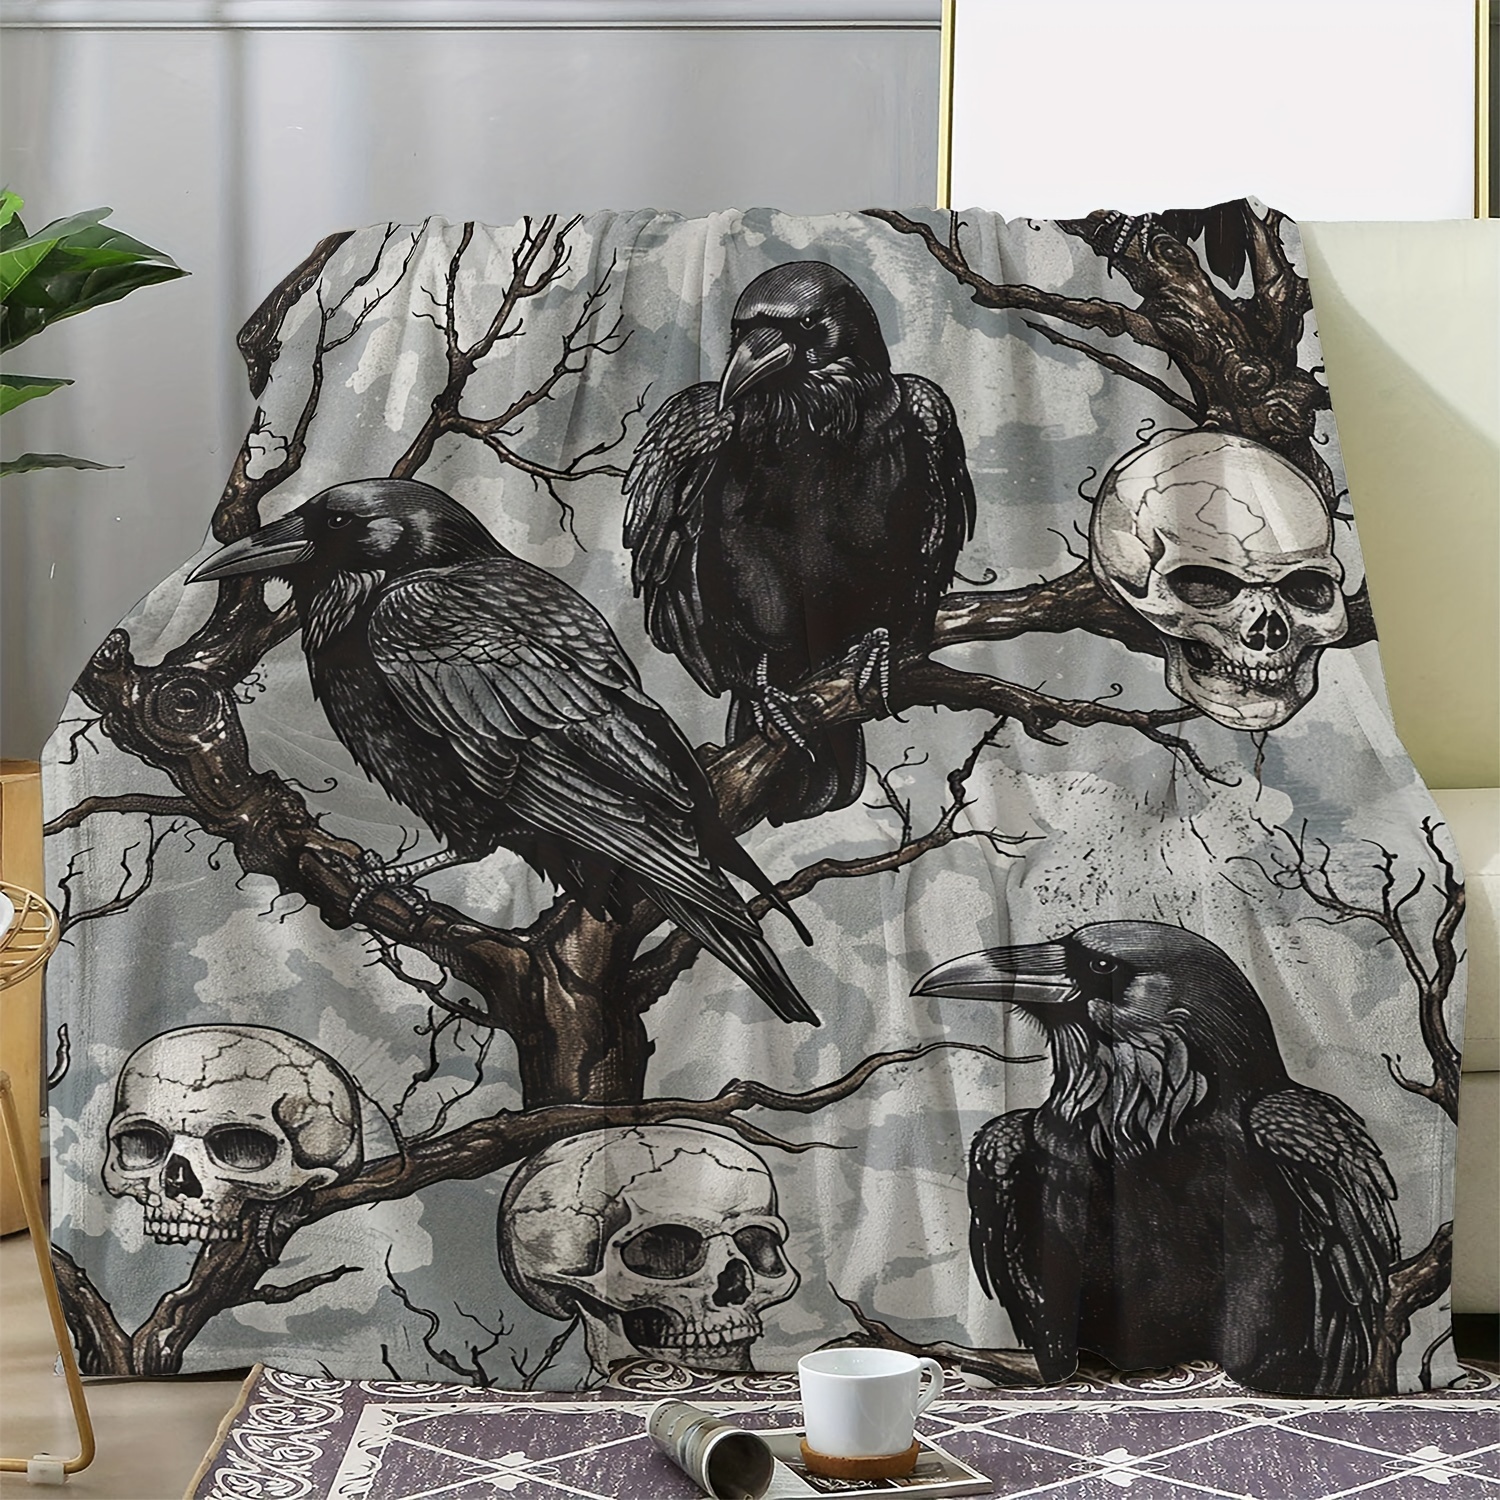 

Cozy Vintage Halloween Flannel Blanket - & Black Crow Print, Soft & Warm For Couch, Bed, Car, Office, Camping | All-season Gift Blanket